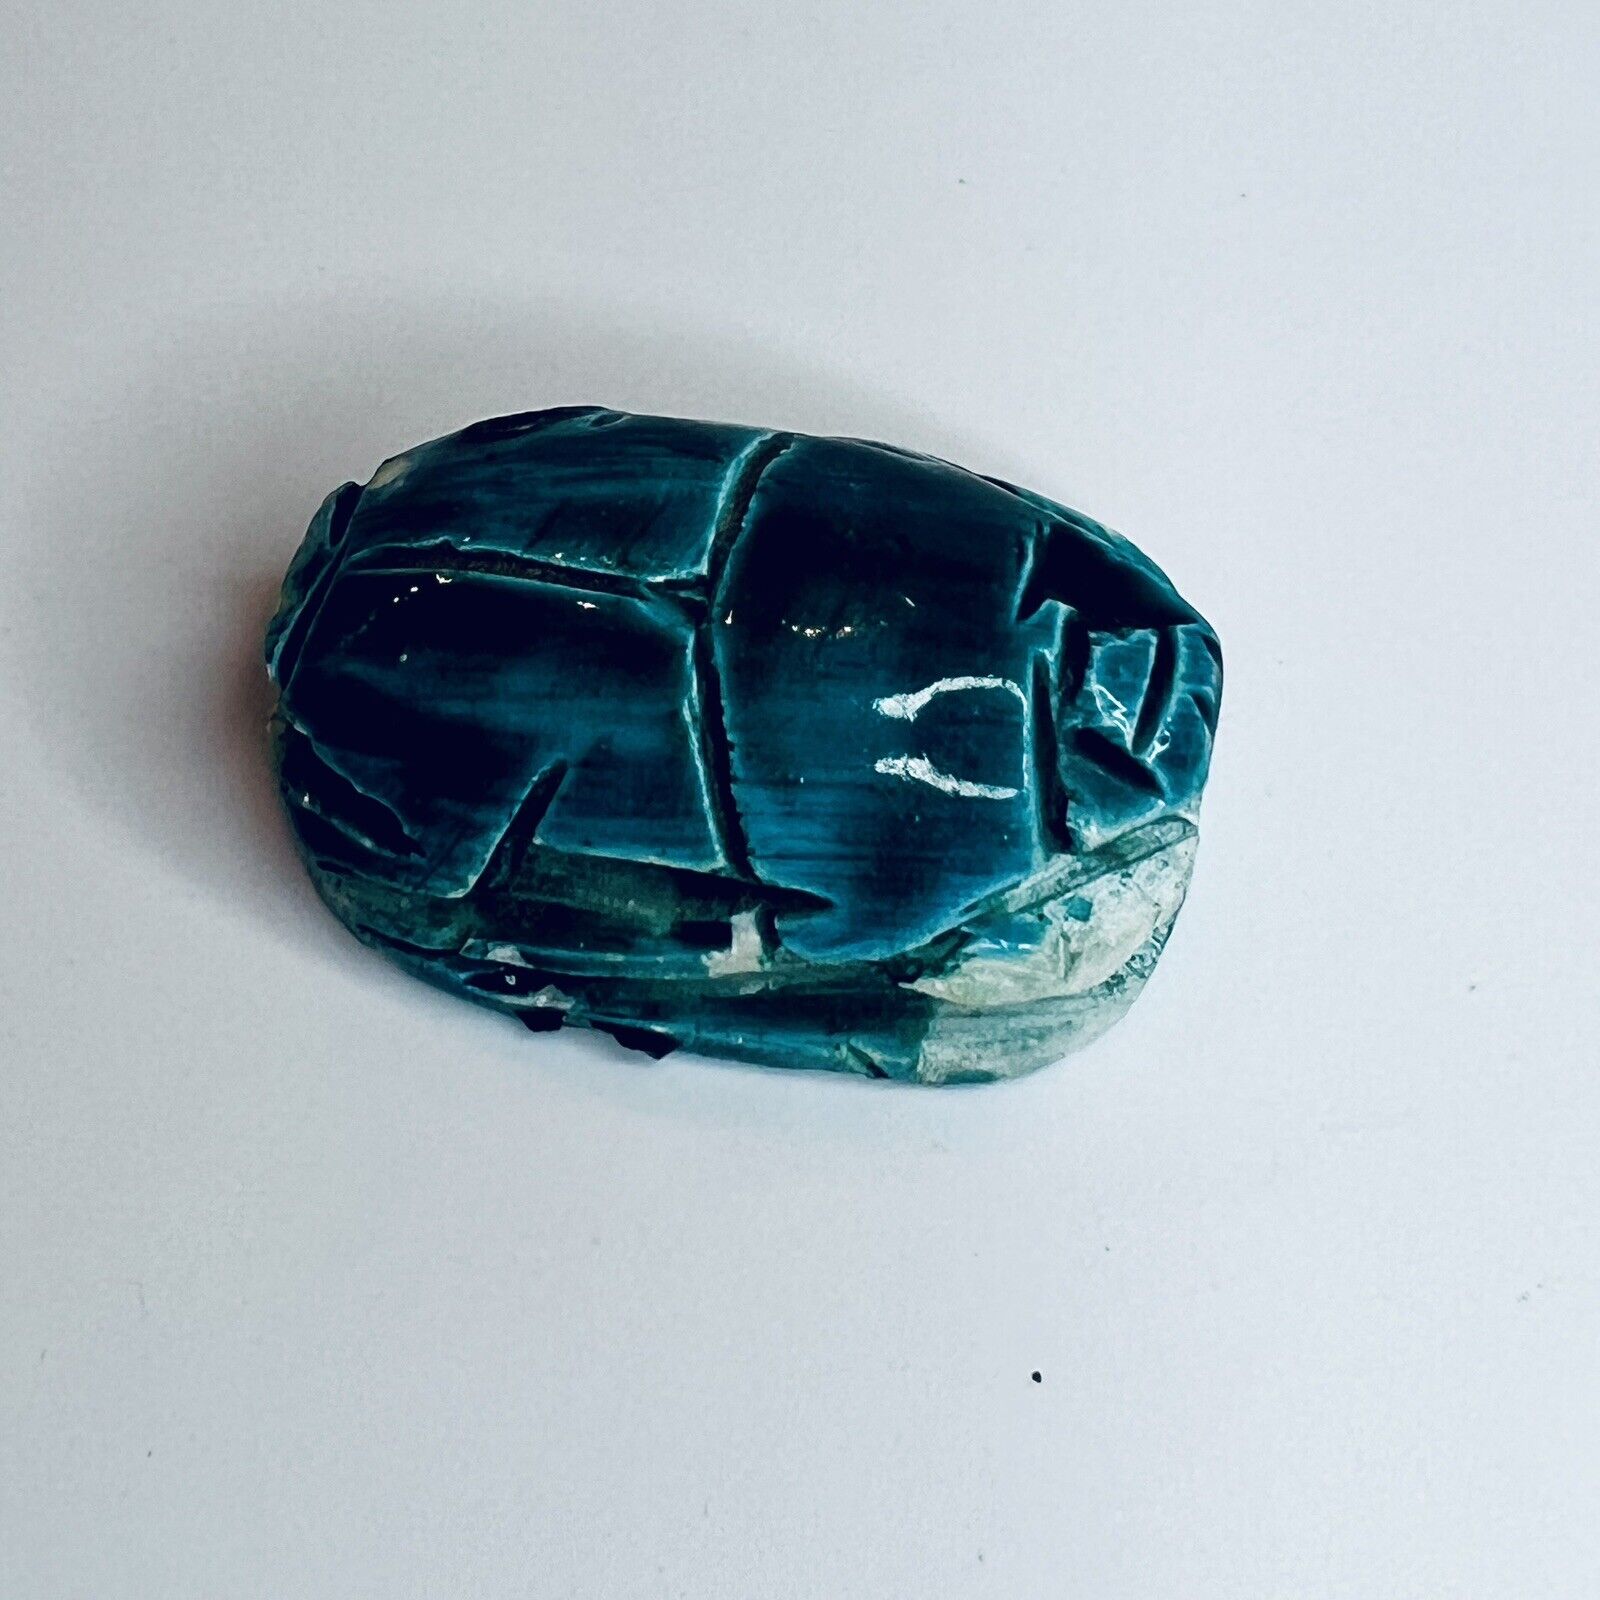 Giant 2” Modern Egyptian Scarab Bead Carved Blue. Modern Reproduction